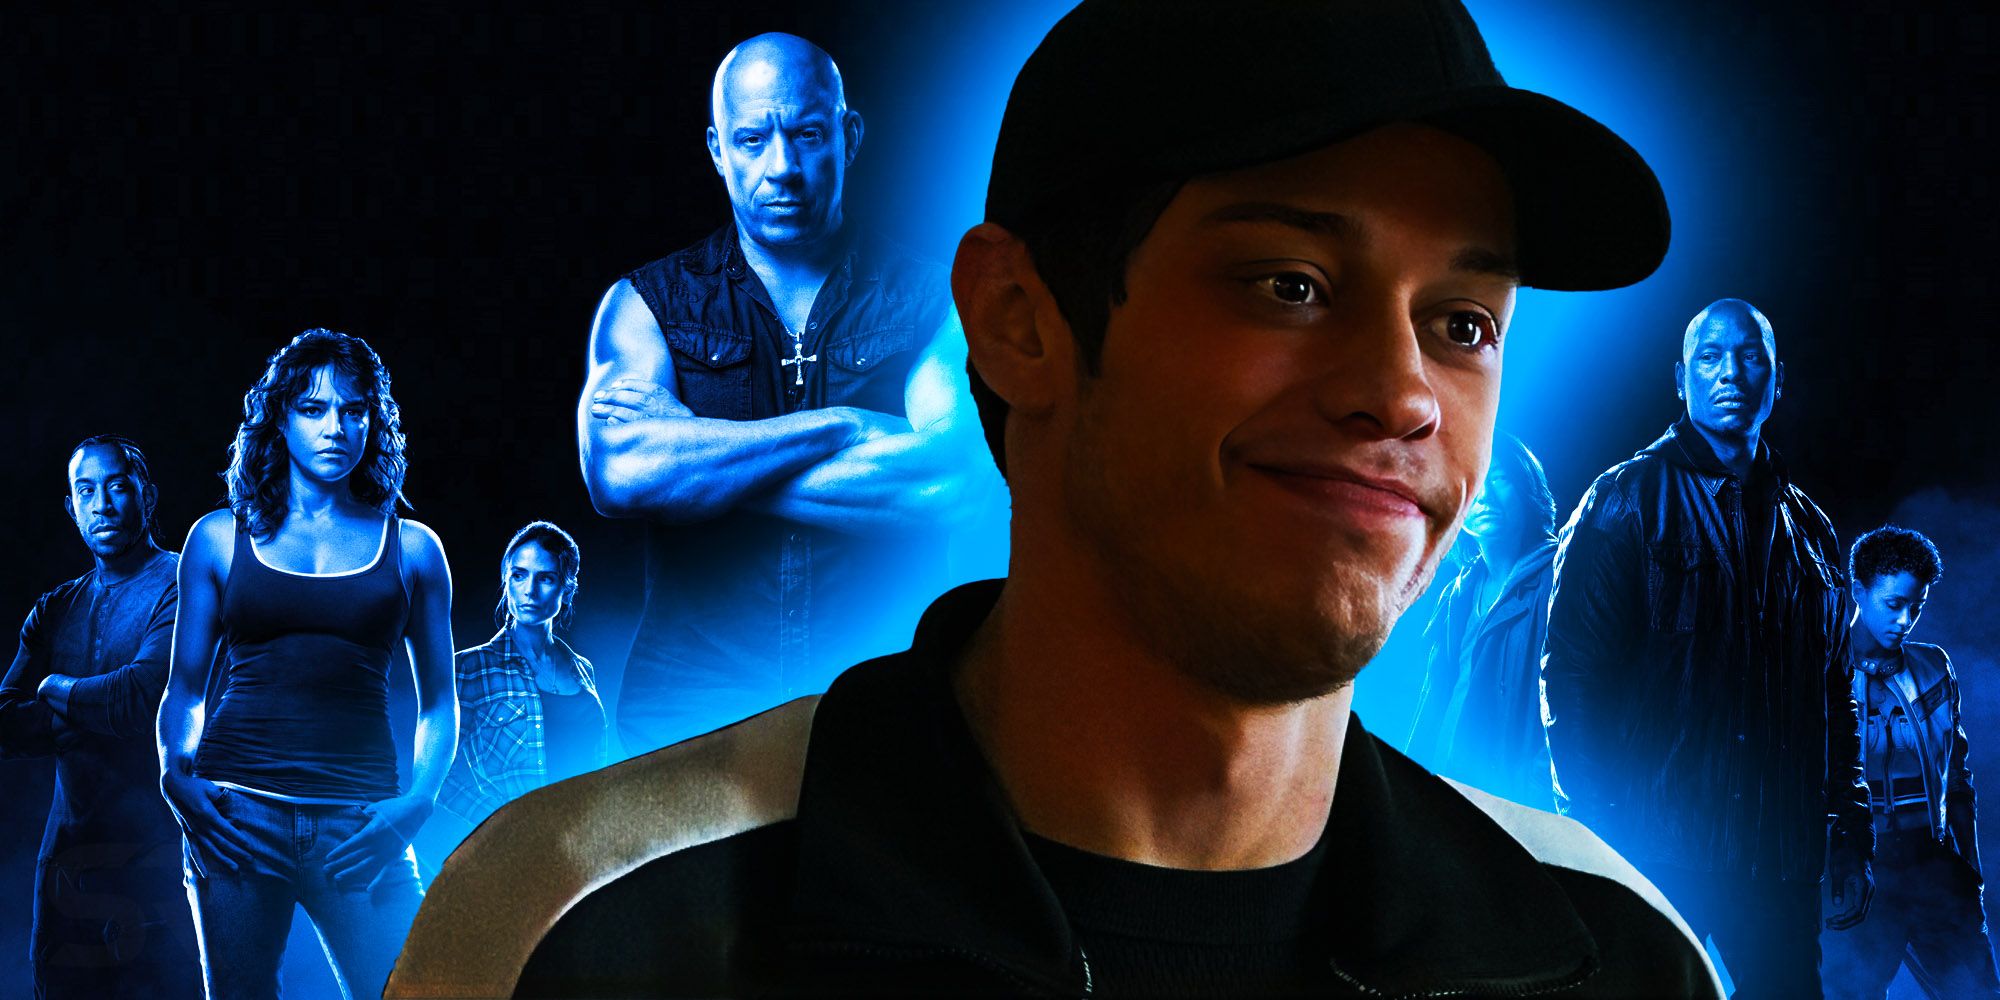 Fast X: The new Fast and Furious movie's cameos, resurrections